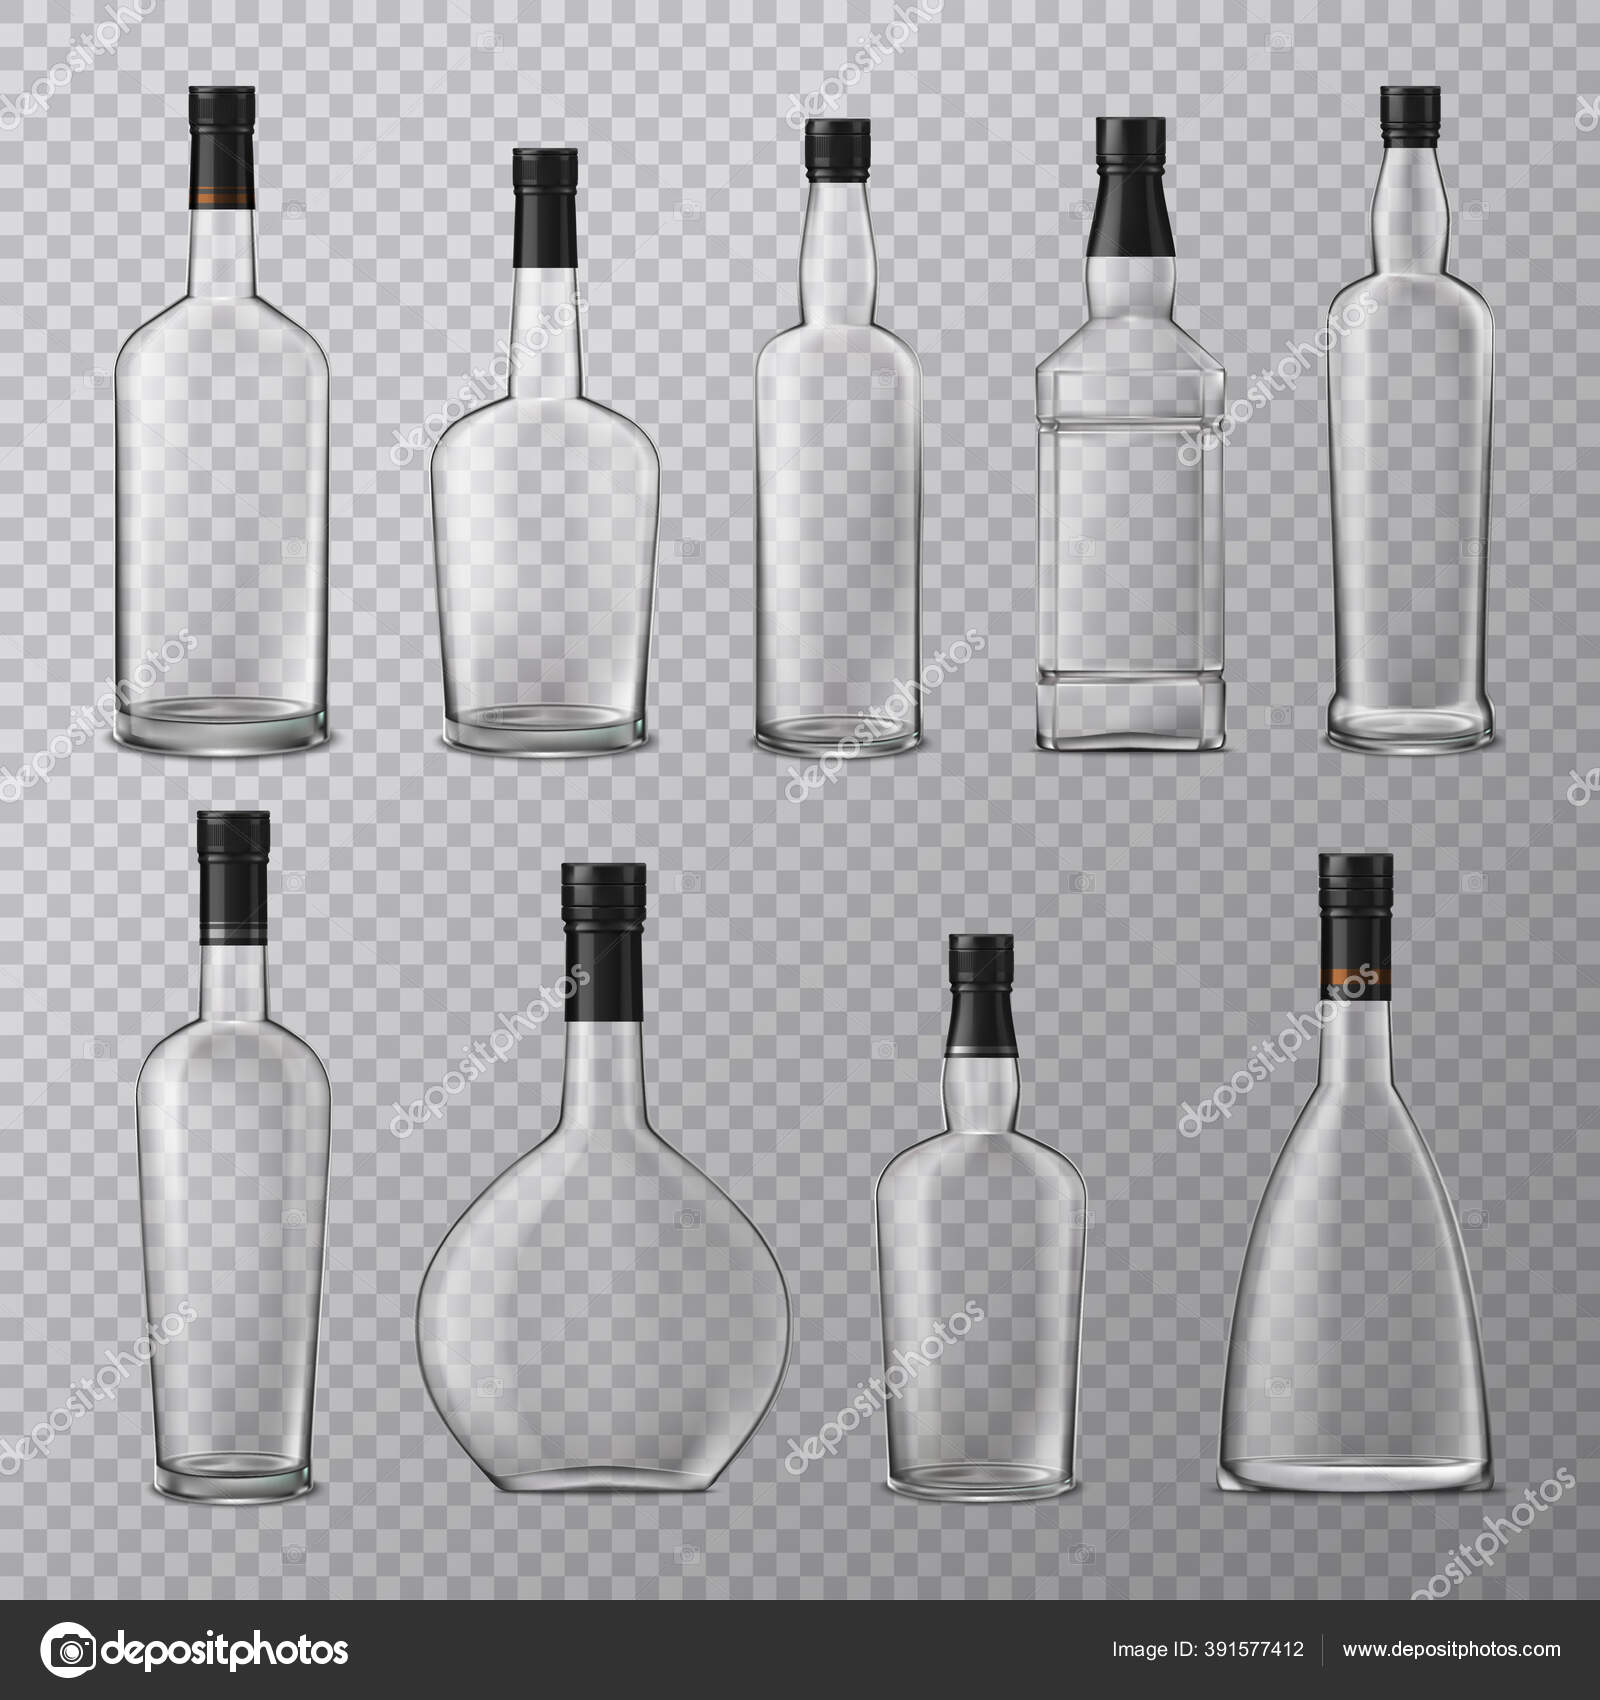 Free Vector  Alcohol drinks glassware realistic set with isolated empty  glasses of various classic shapes on transparent background vector  illustration